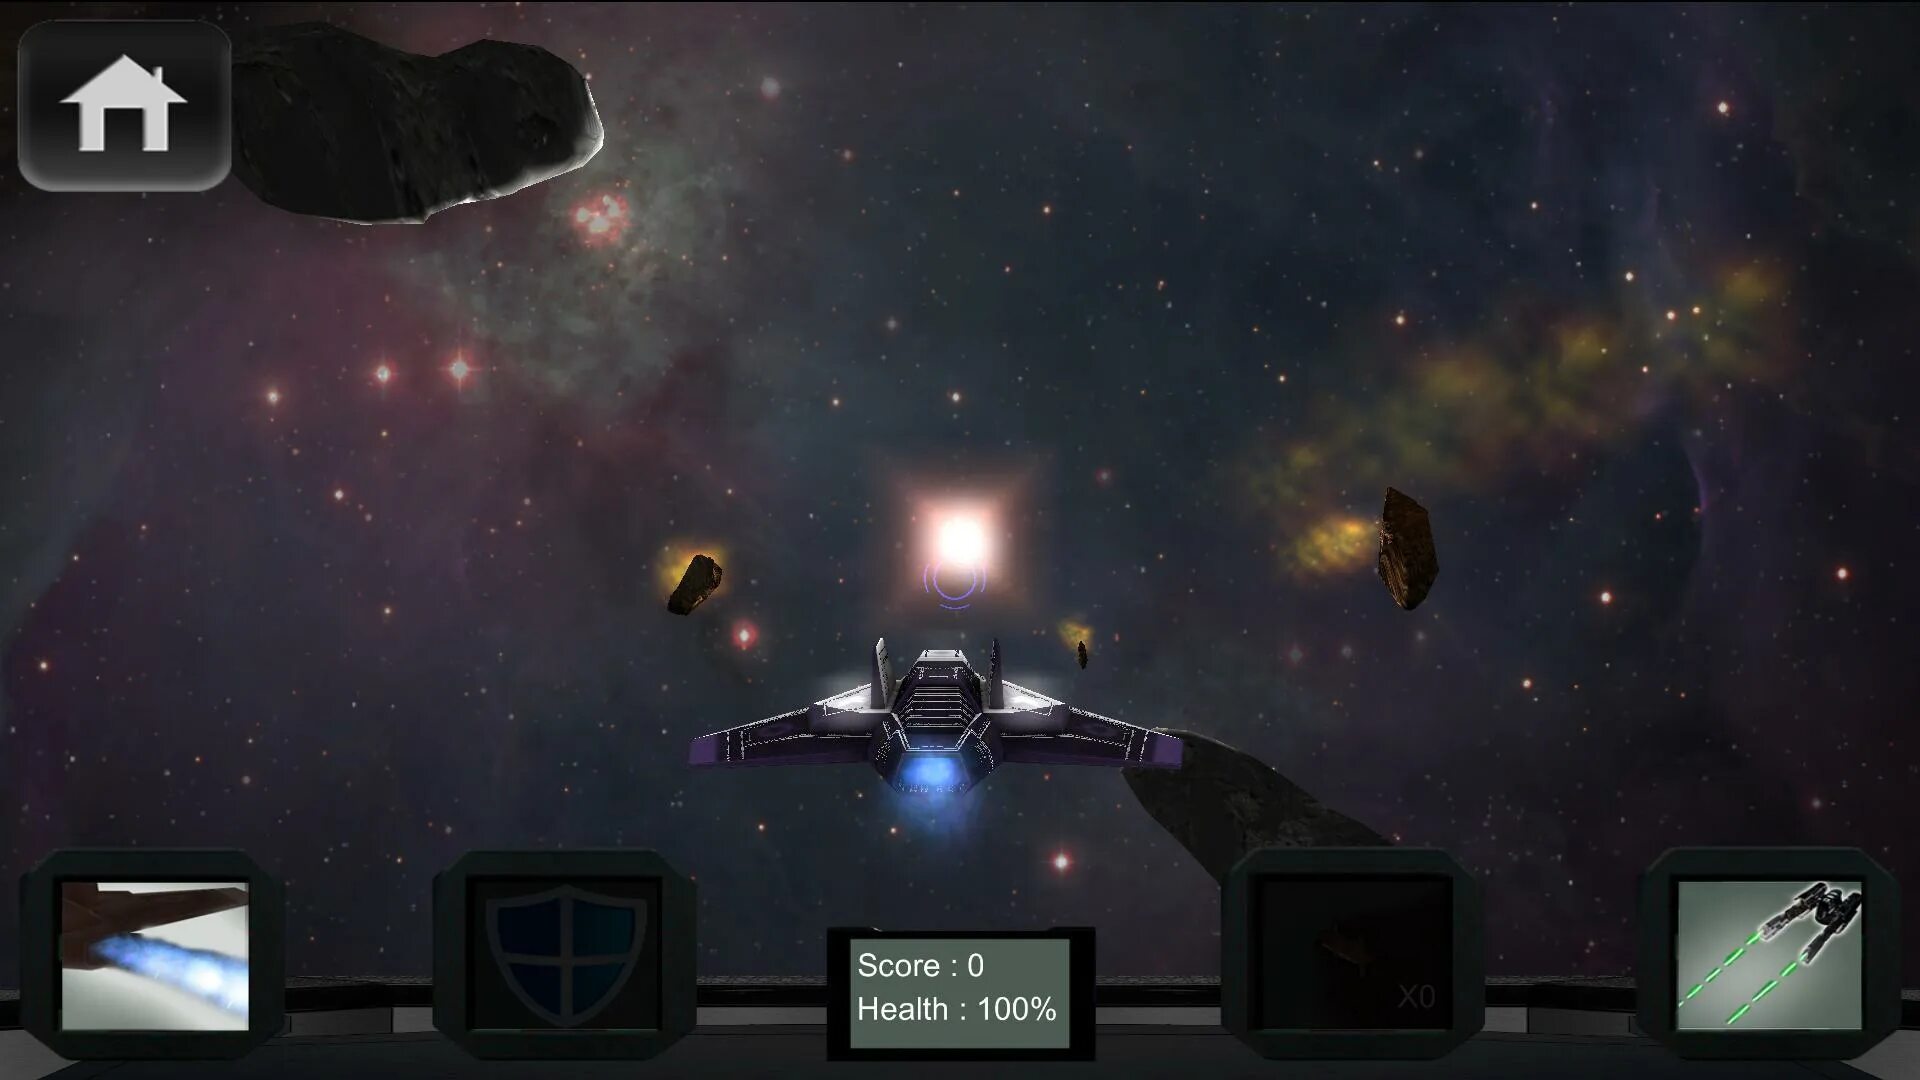 Space Fighter игра. Shoot 'em up космос истребитель. Endless Space Android. Last Space Fighter.